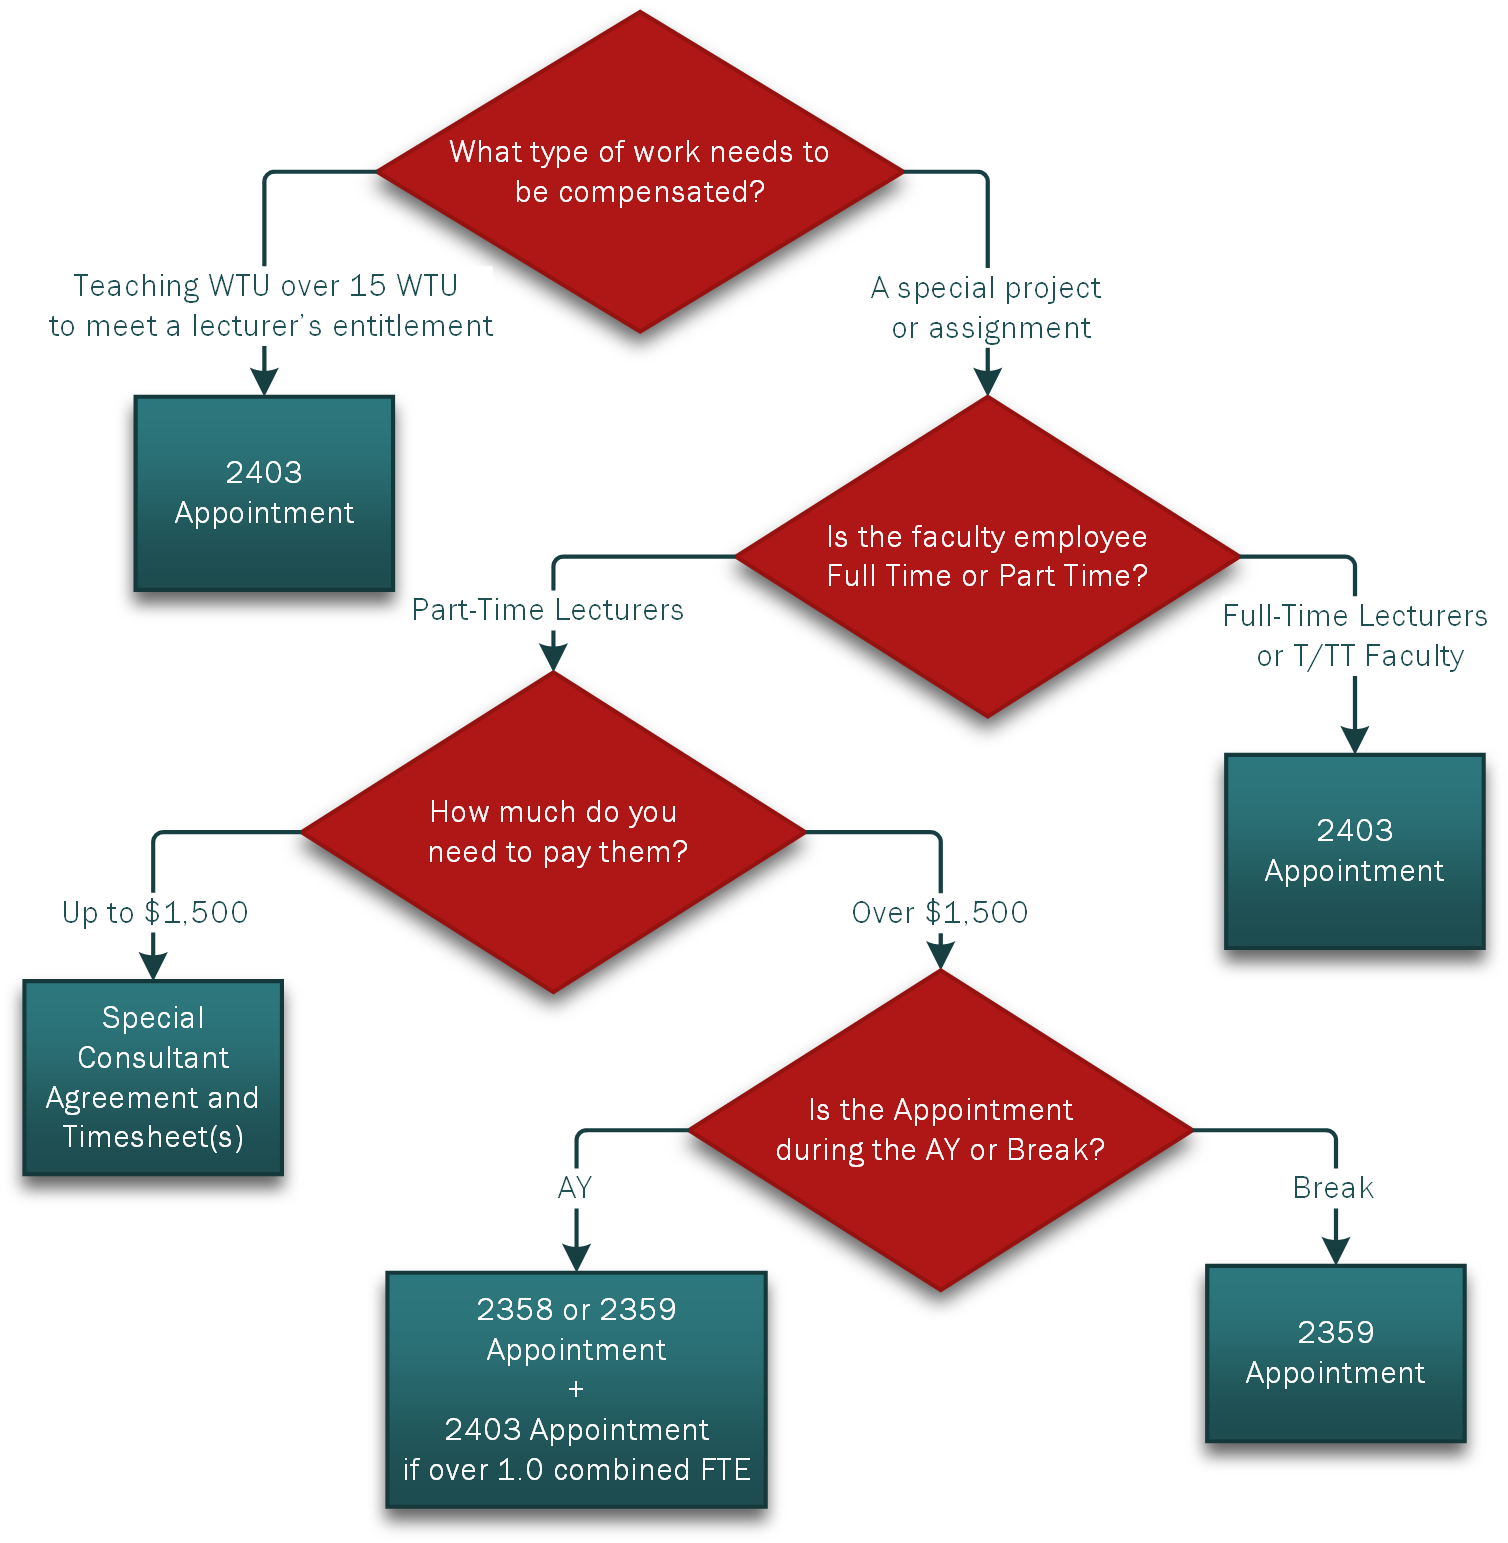 A decision tree to determine the appropriate method of compensation for additional employment.